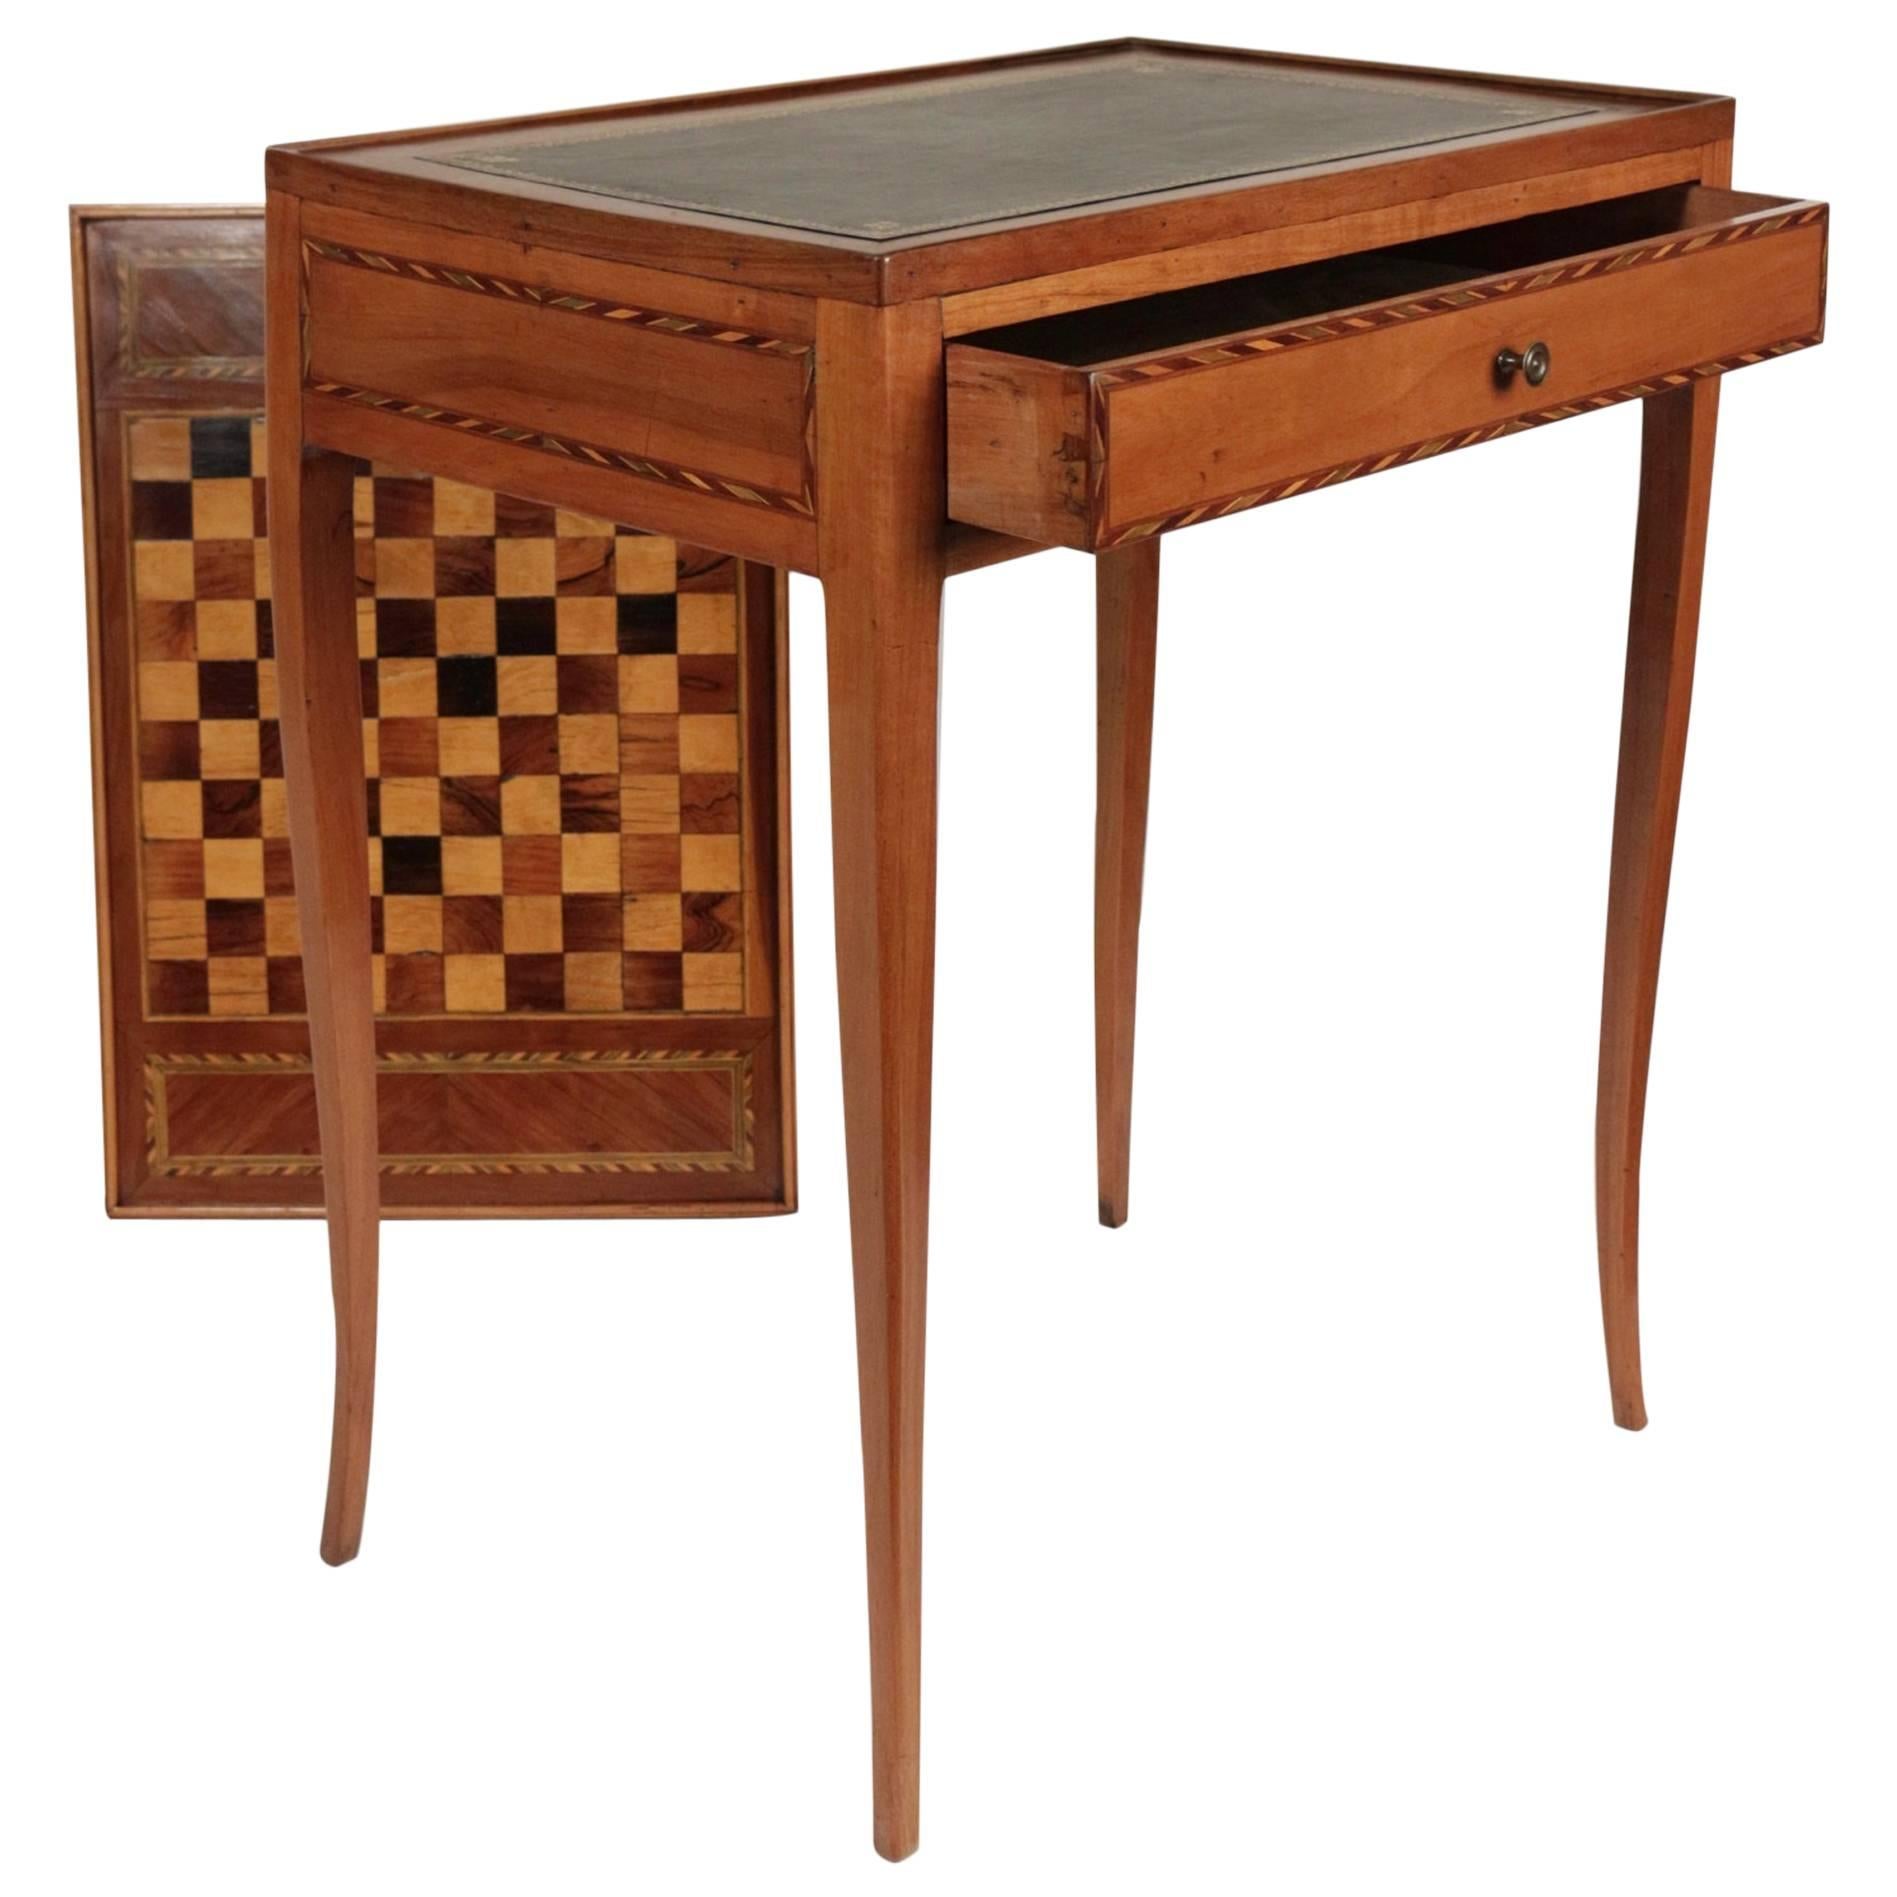 French Transition Period, circa 1765 Reversible Desk and Game Table